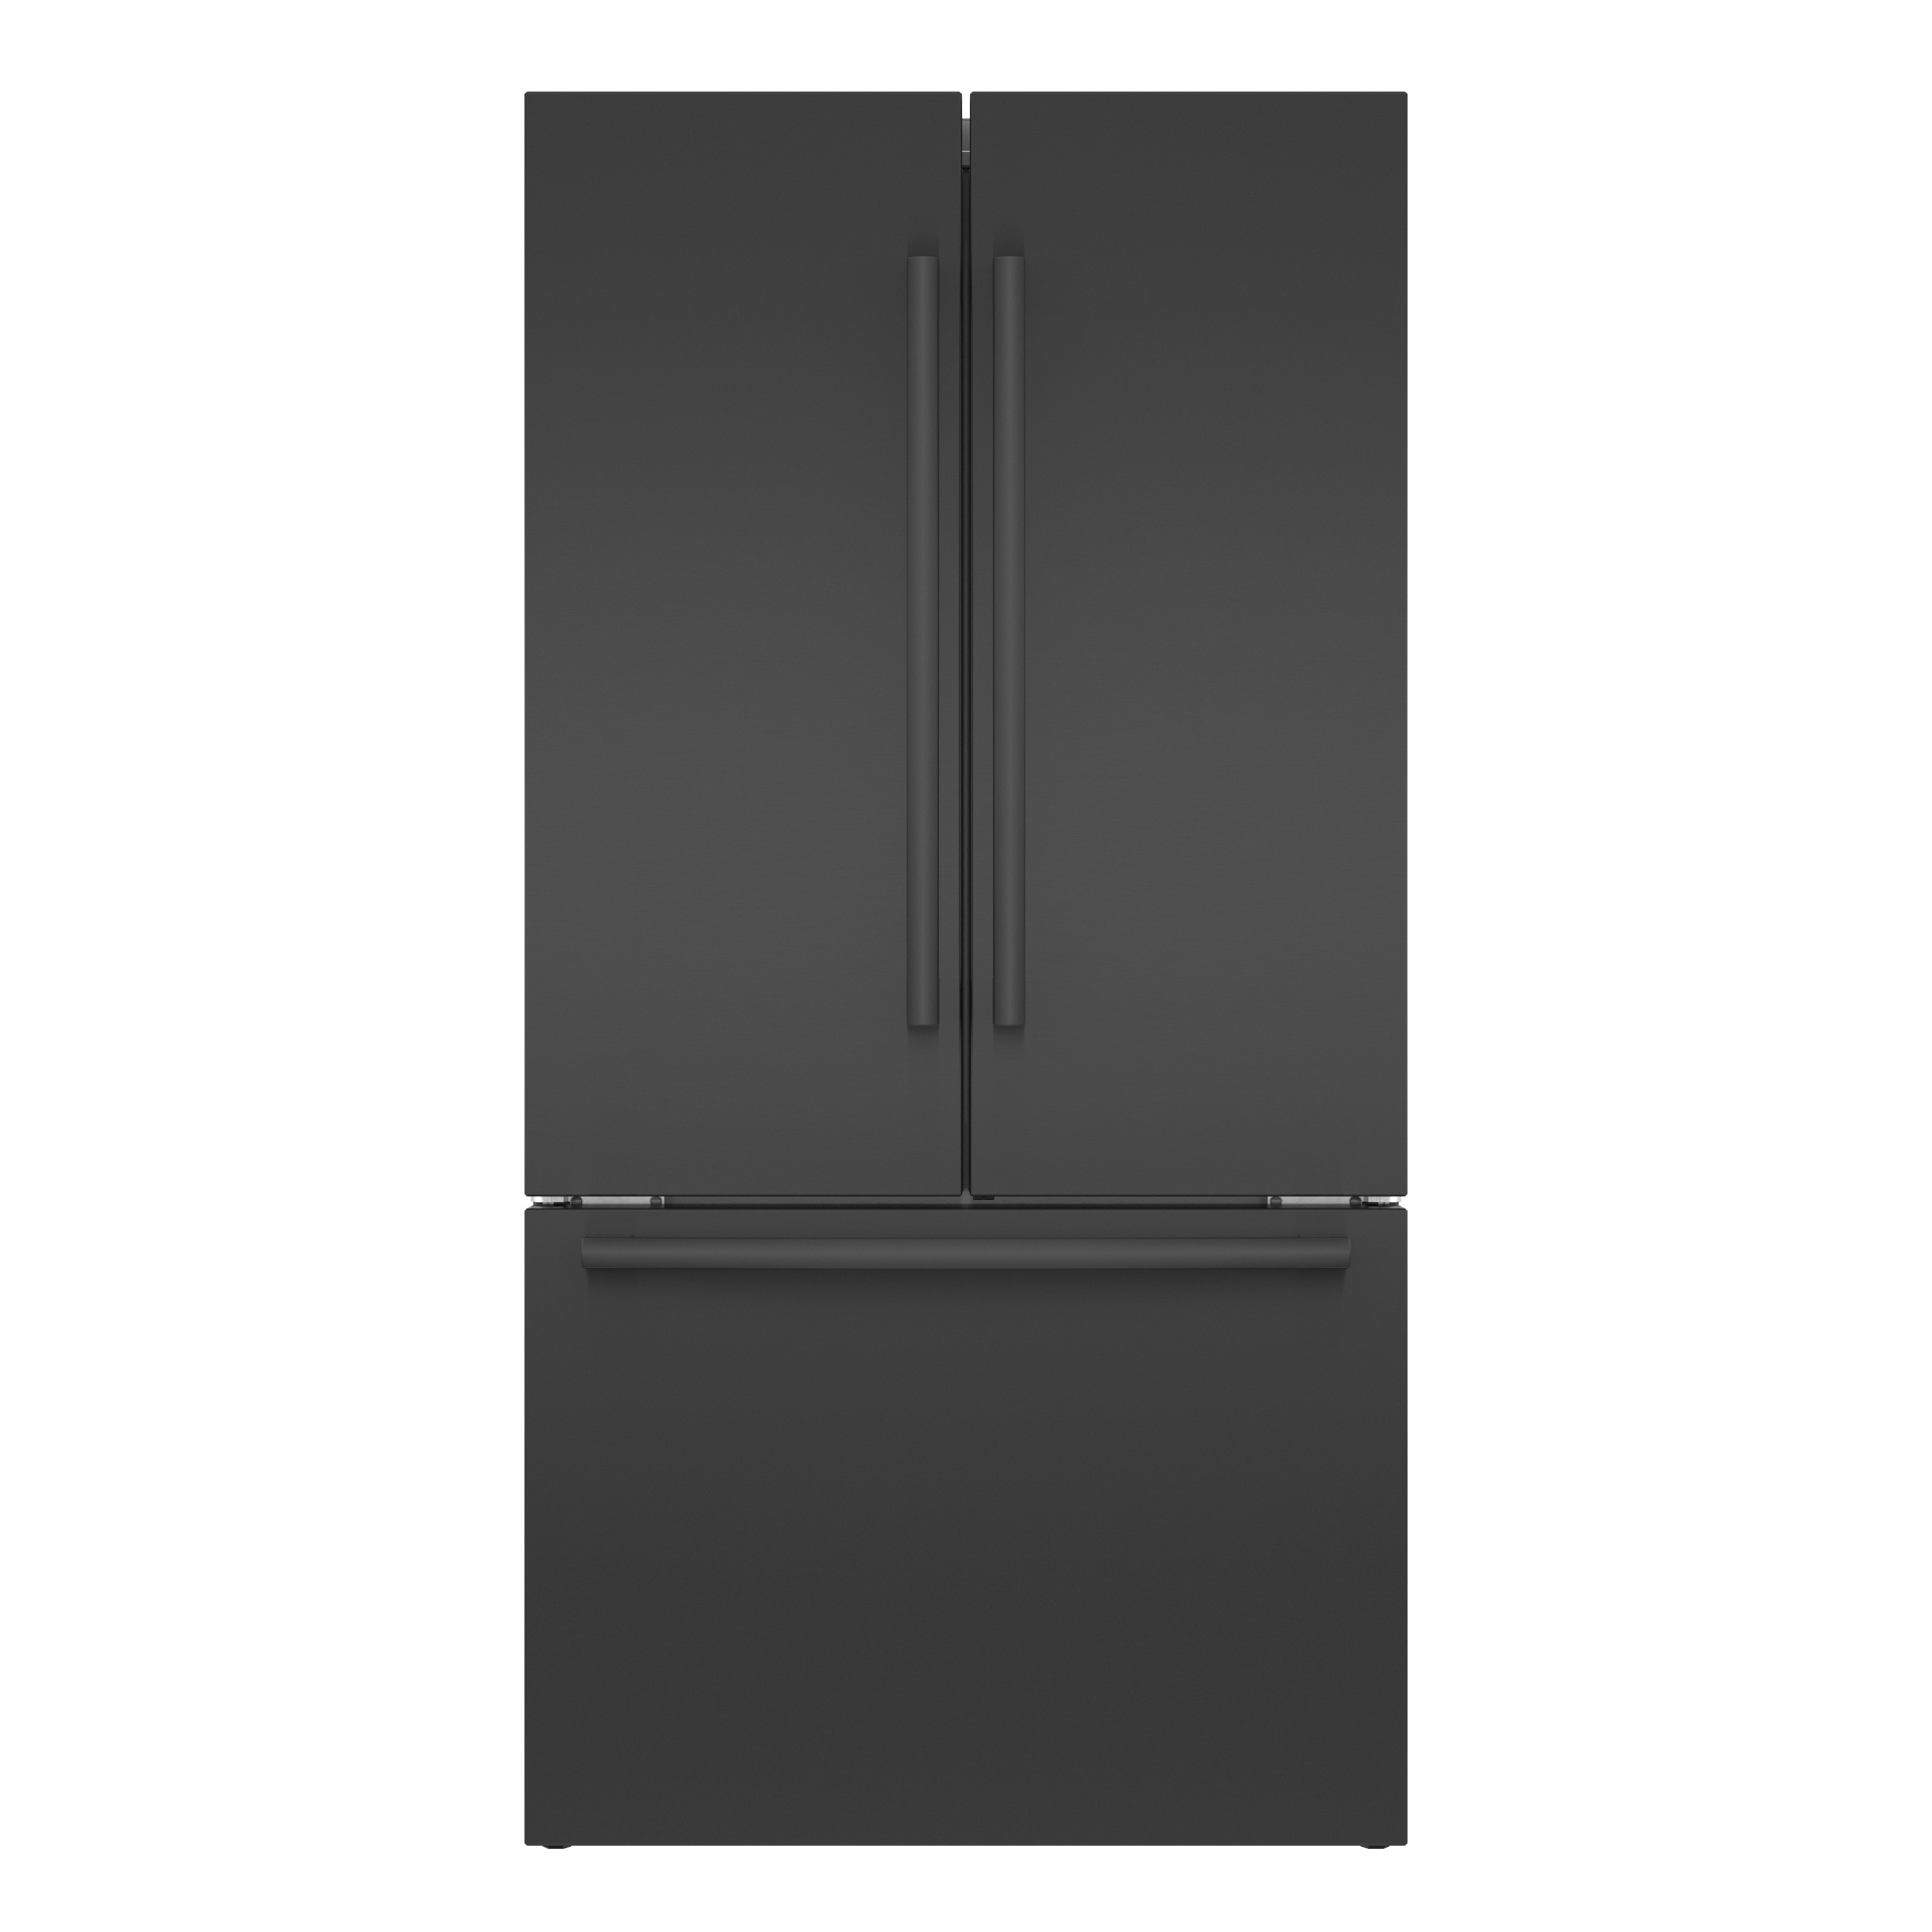 Bosch Black Stainless Lowes.com